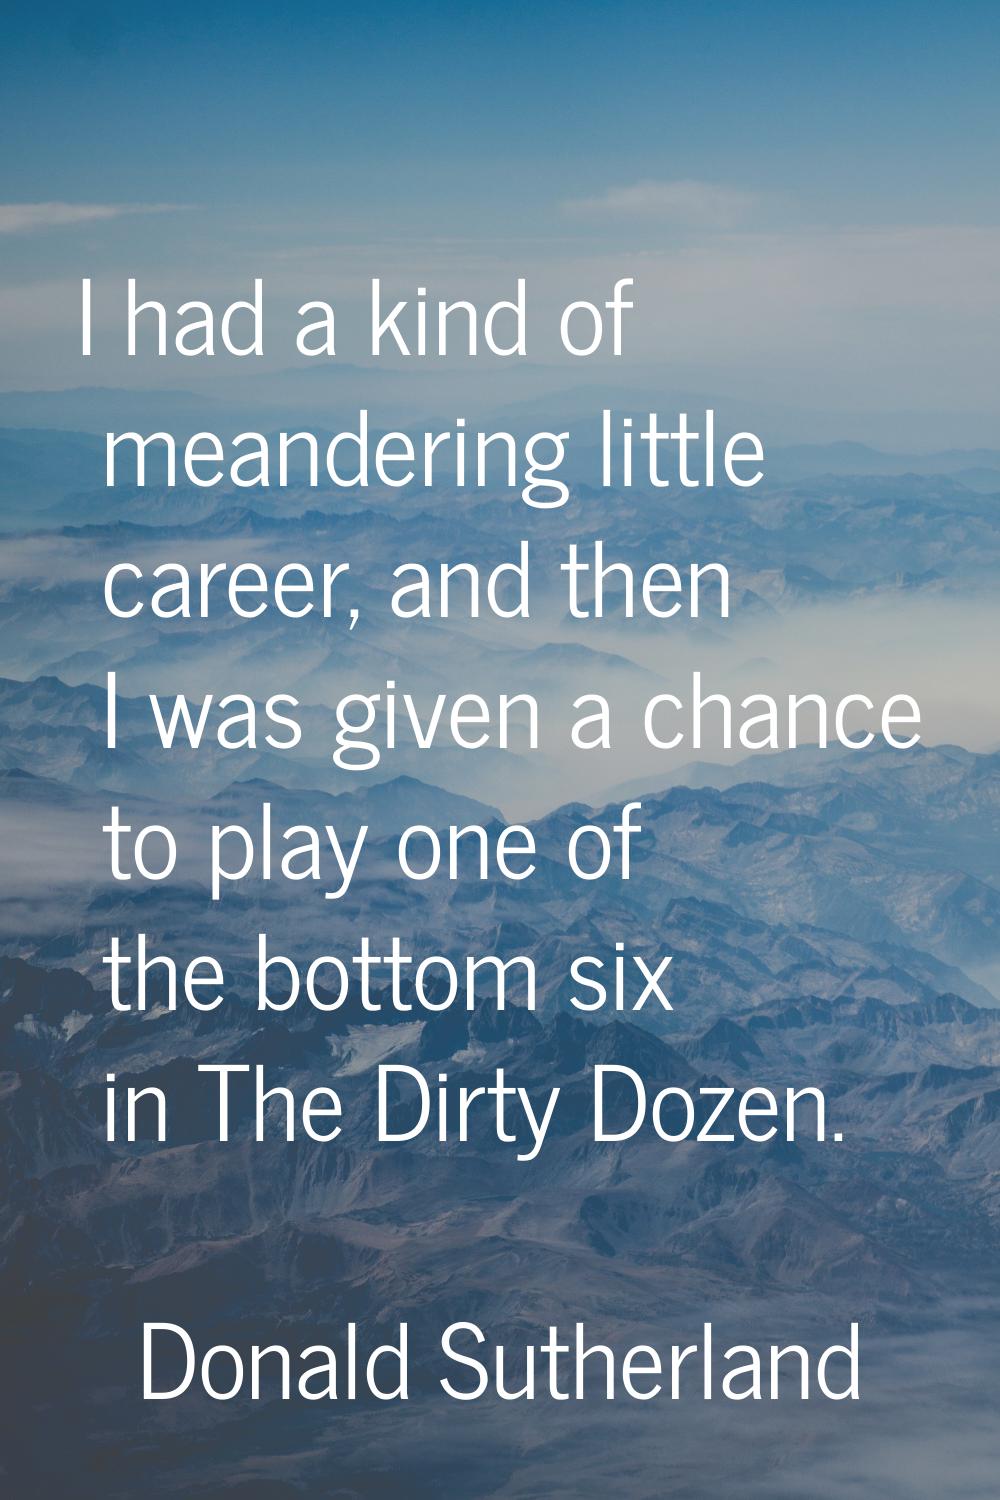 I had a kind of meandering little career, and then I was given a chance to play one of the bottom s